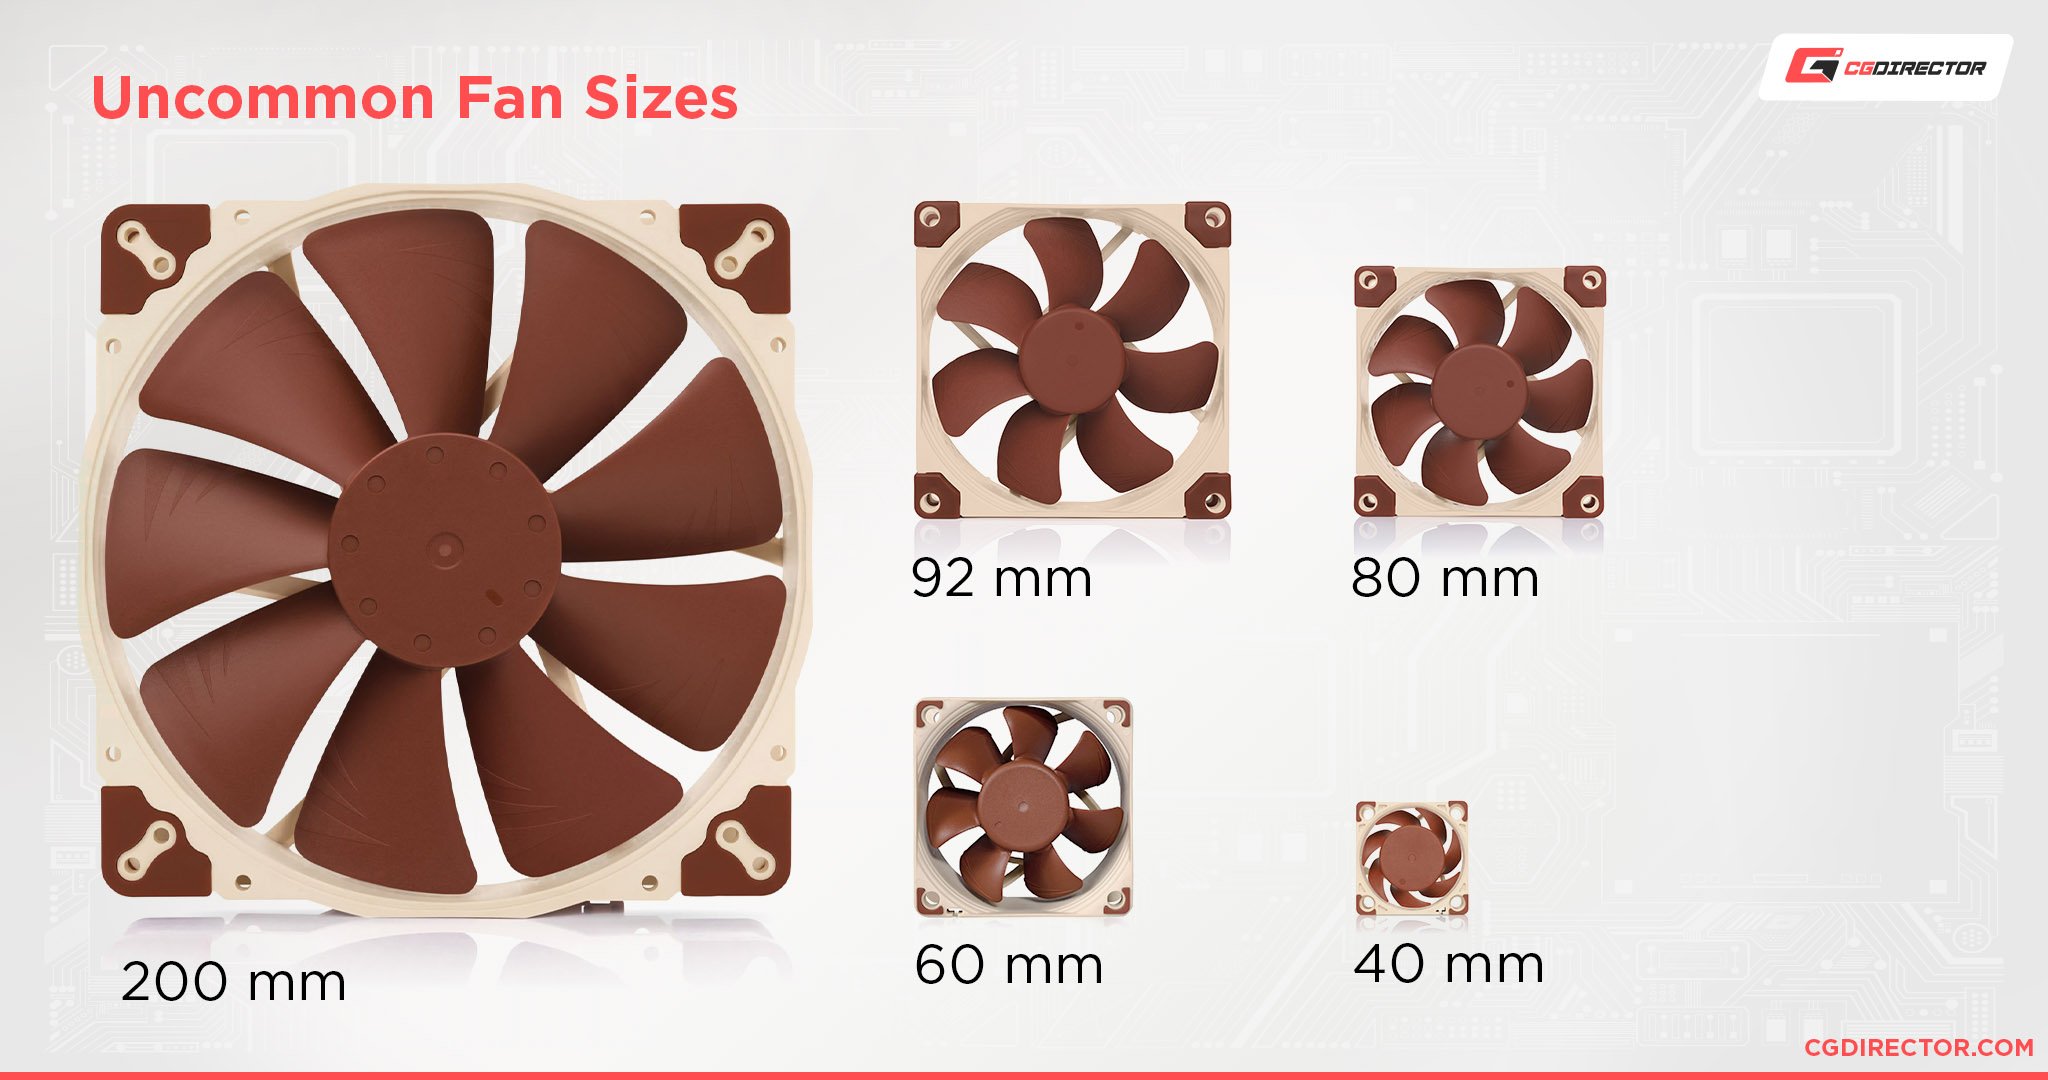 120mm vs 140mm Fans A Clear Winner Most Cases